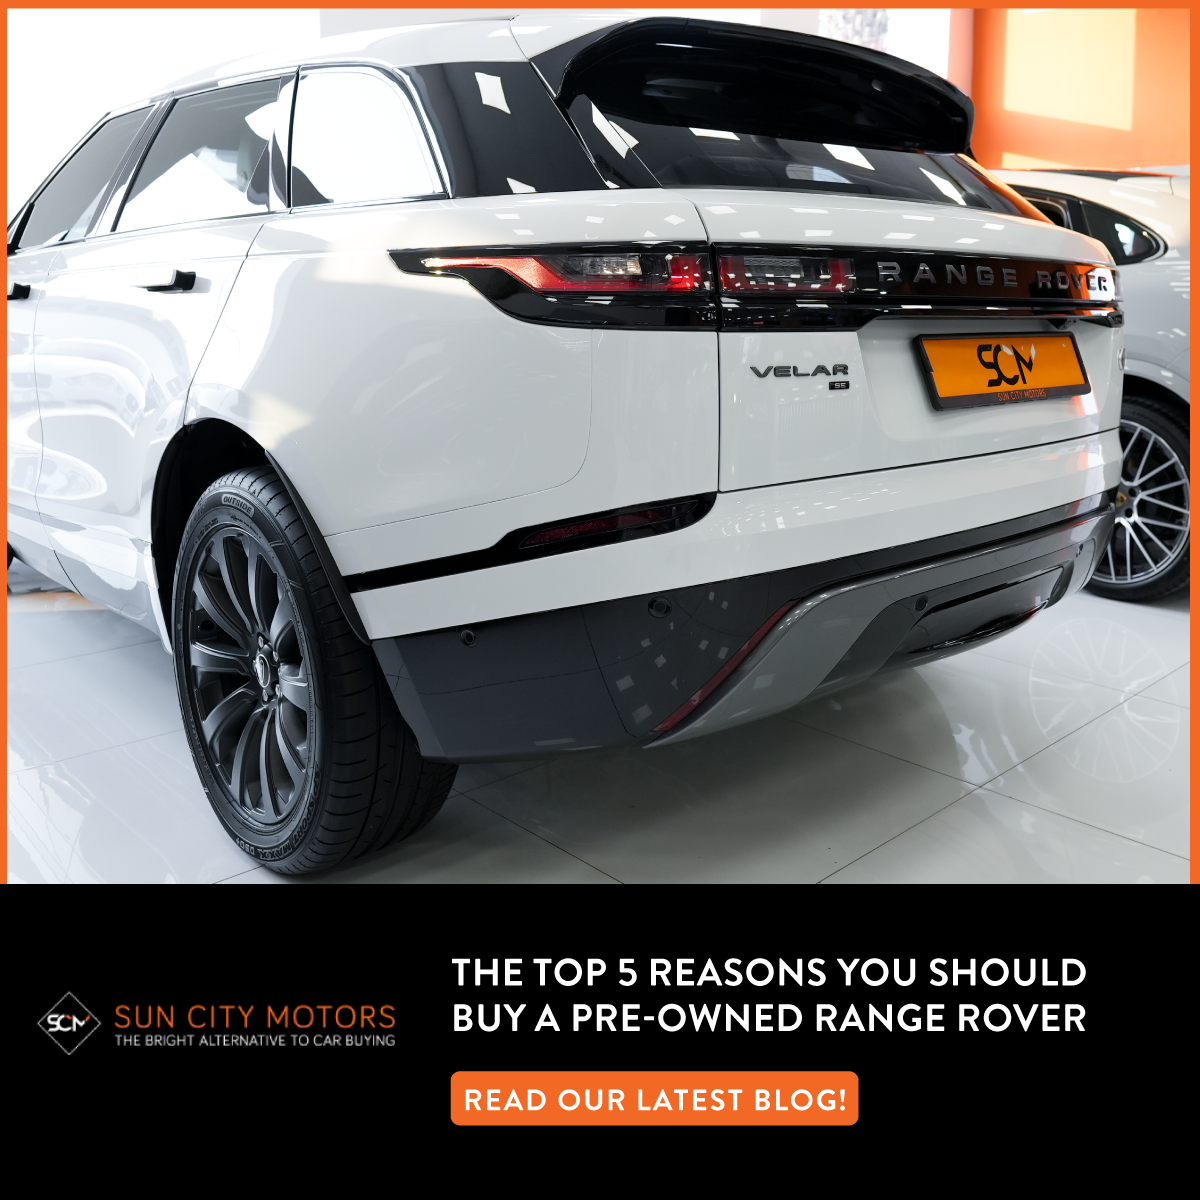 The Top 5 Reasons You Should Buy A Pre-Owned Range Rover